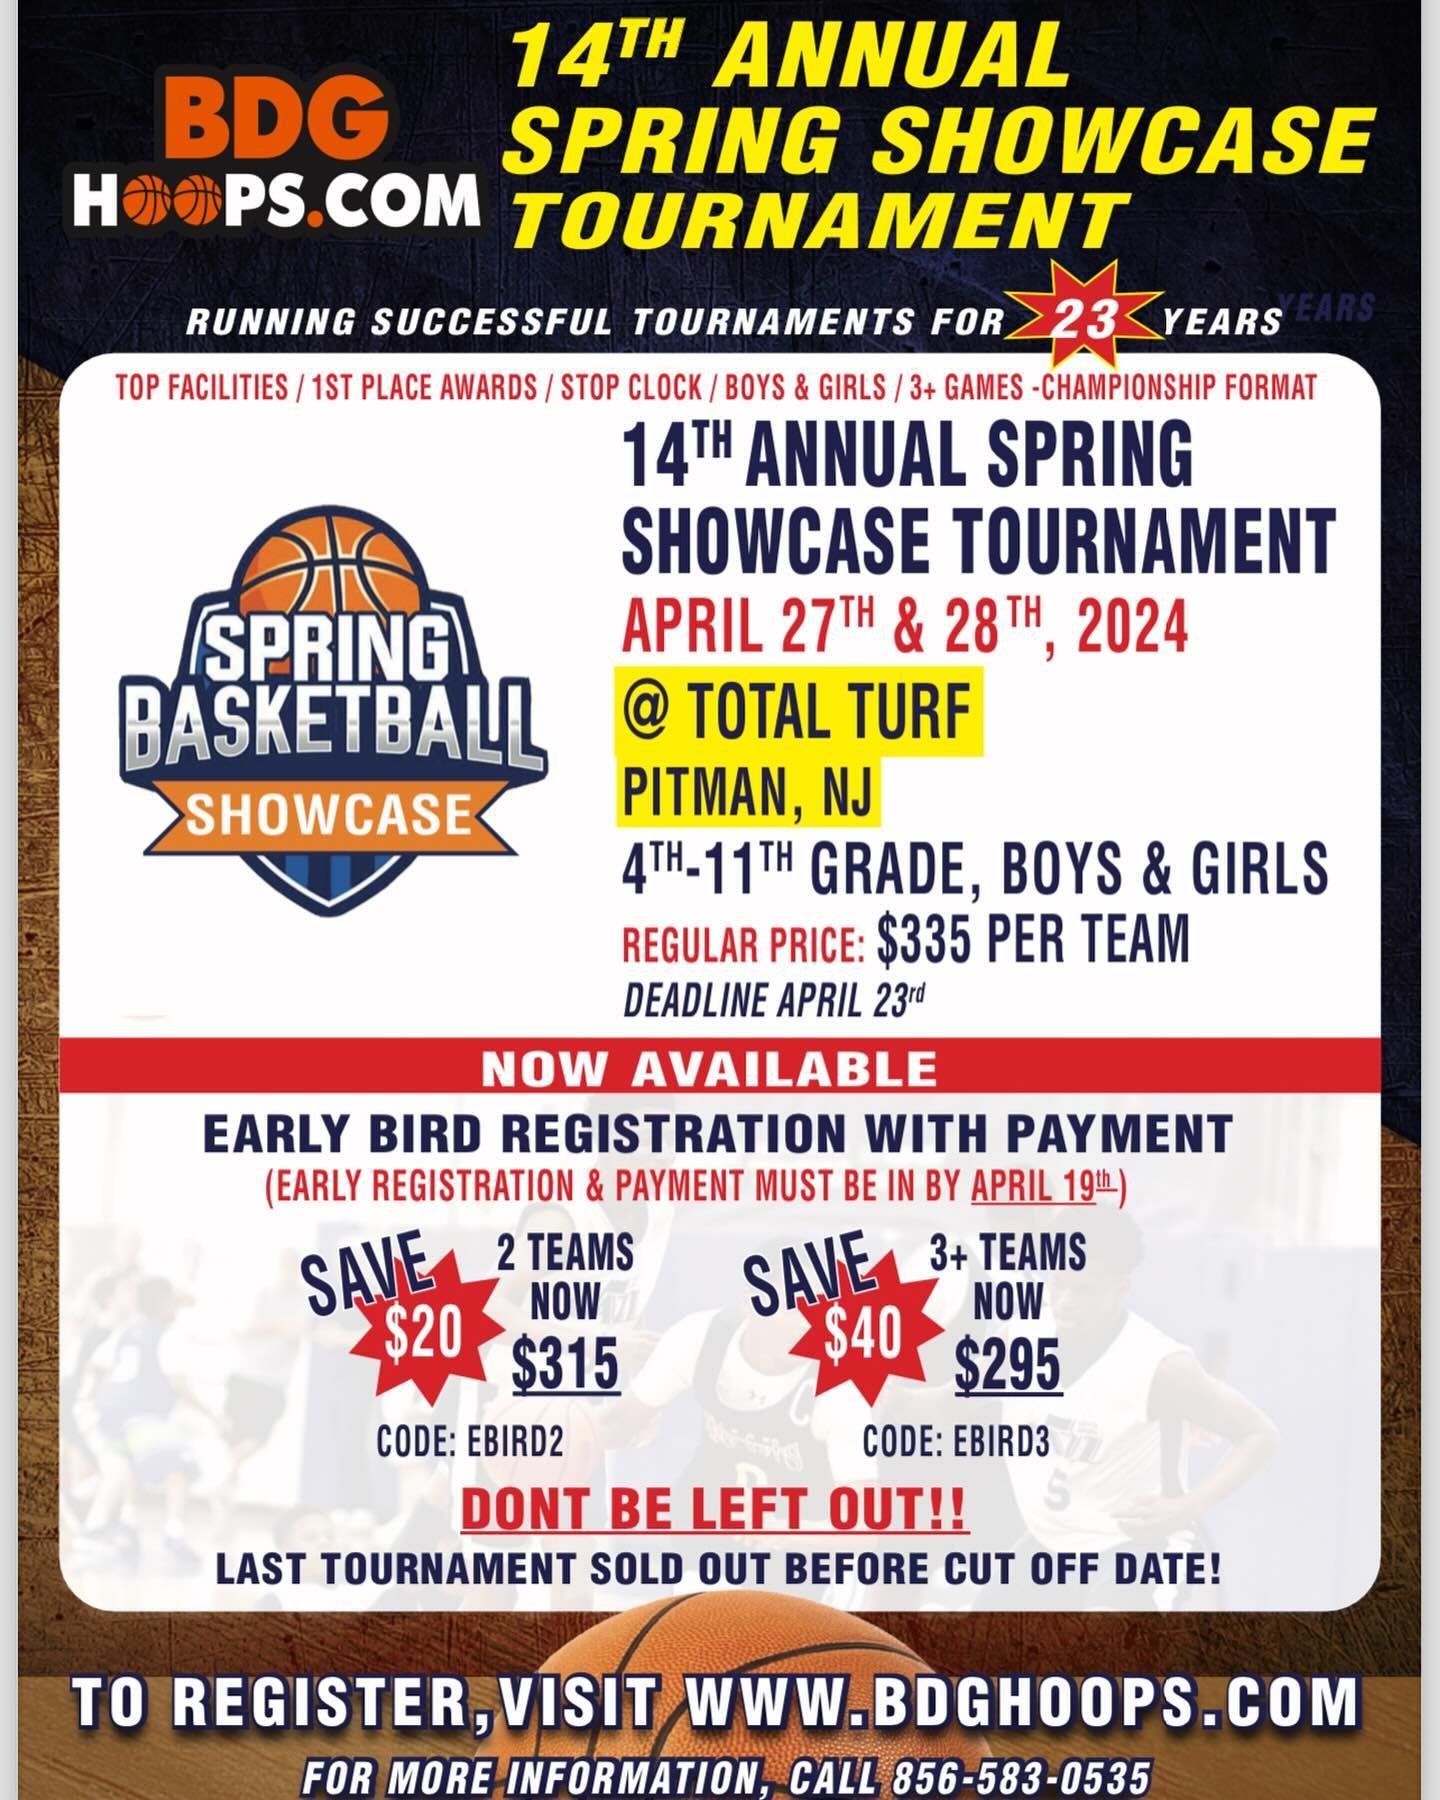 🔥TIME IS RUNNING OUT REGISTER NOW AT WWW.BDGHOOPS.COM🔥